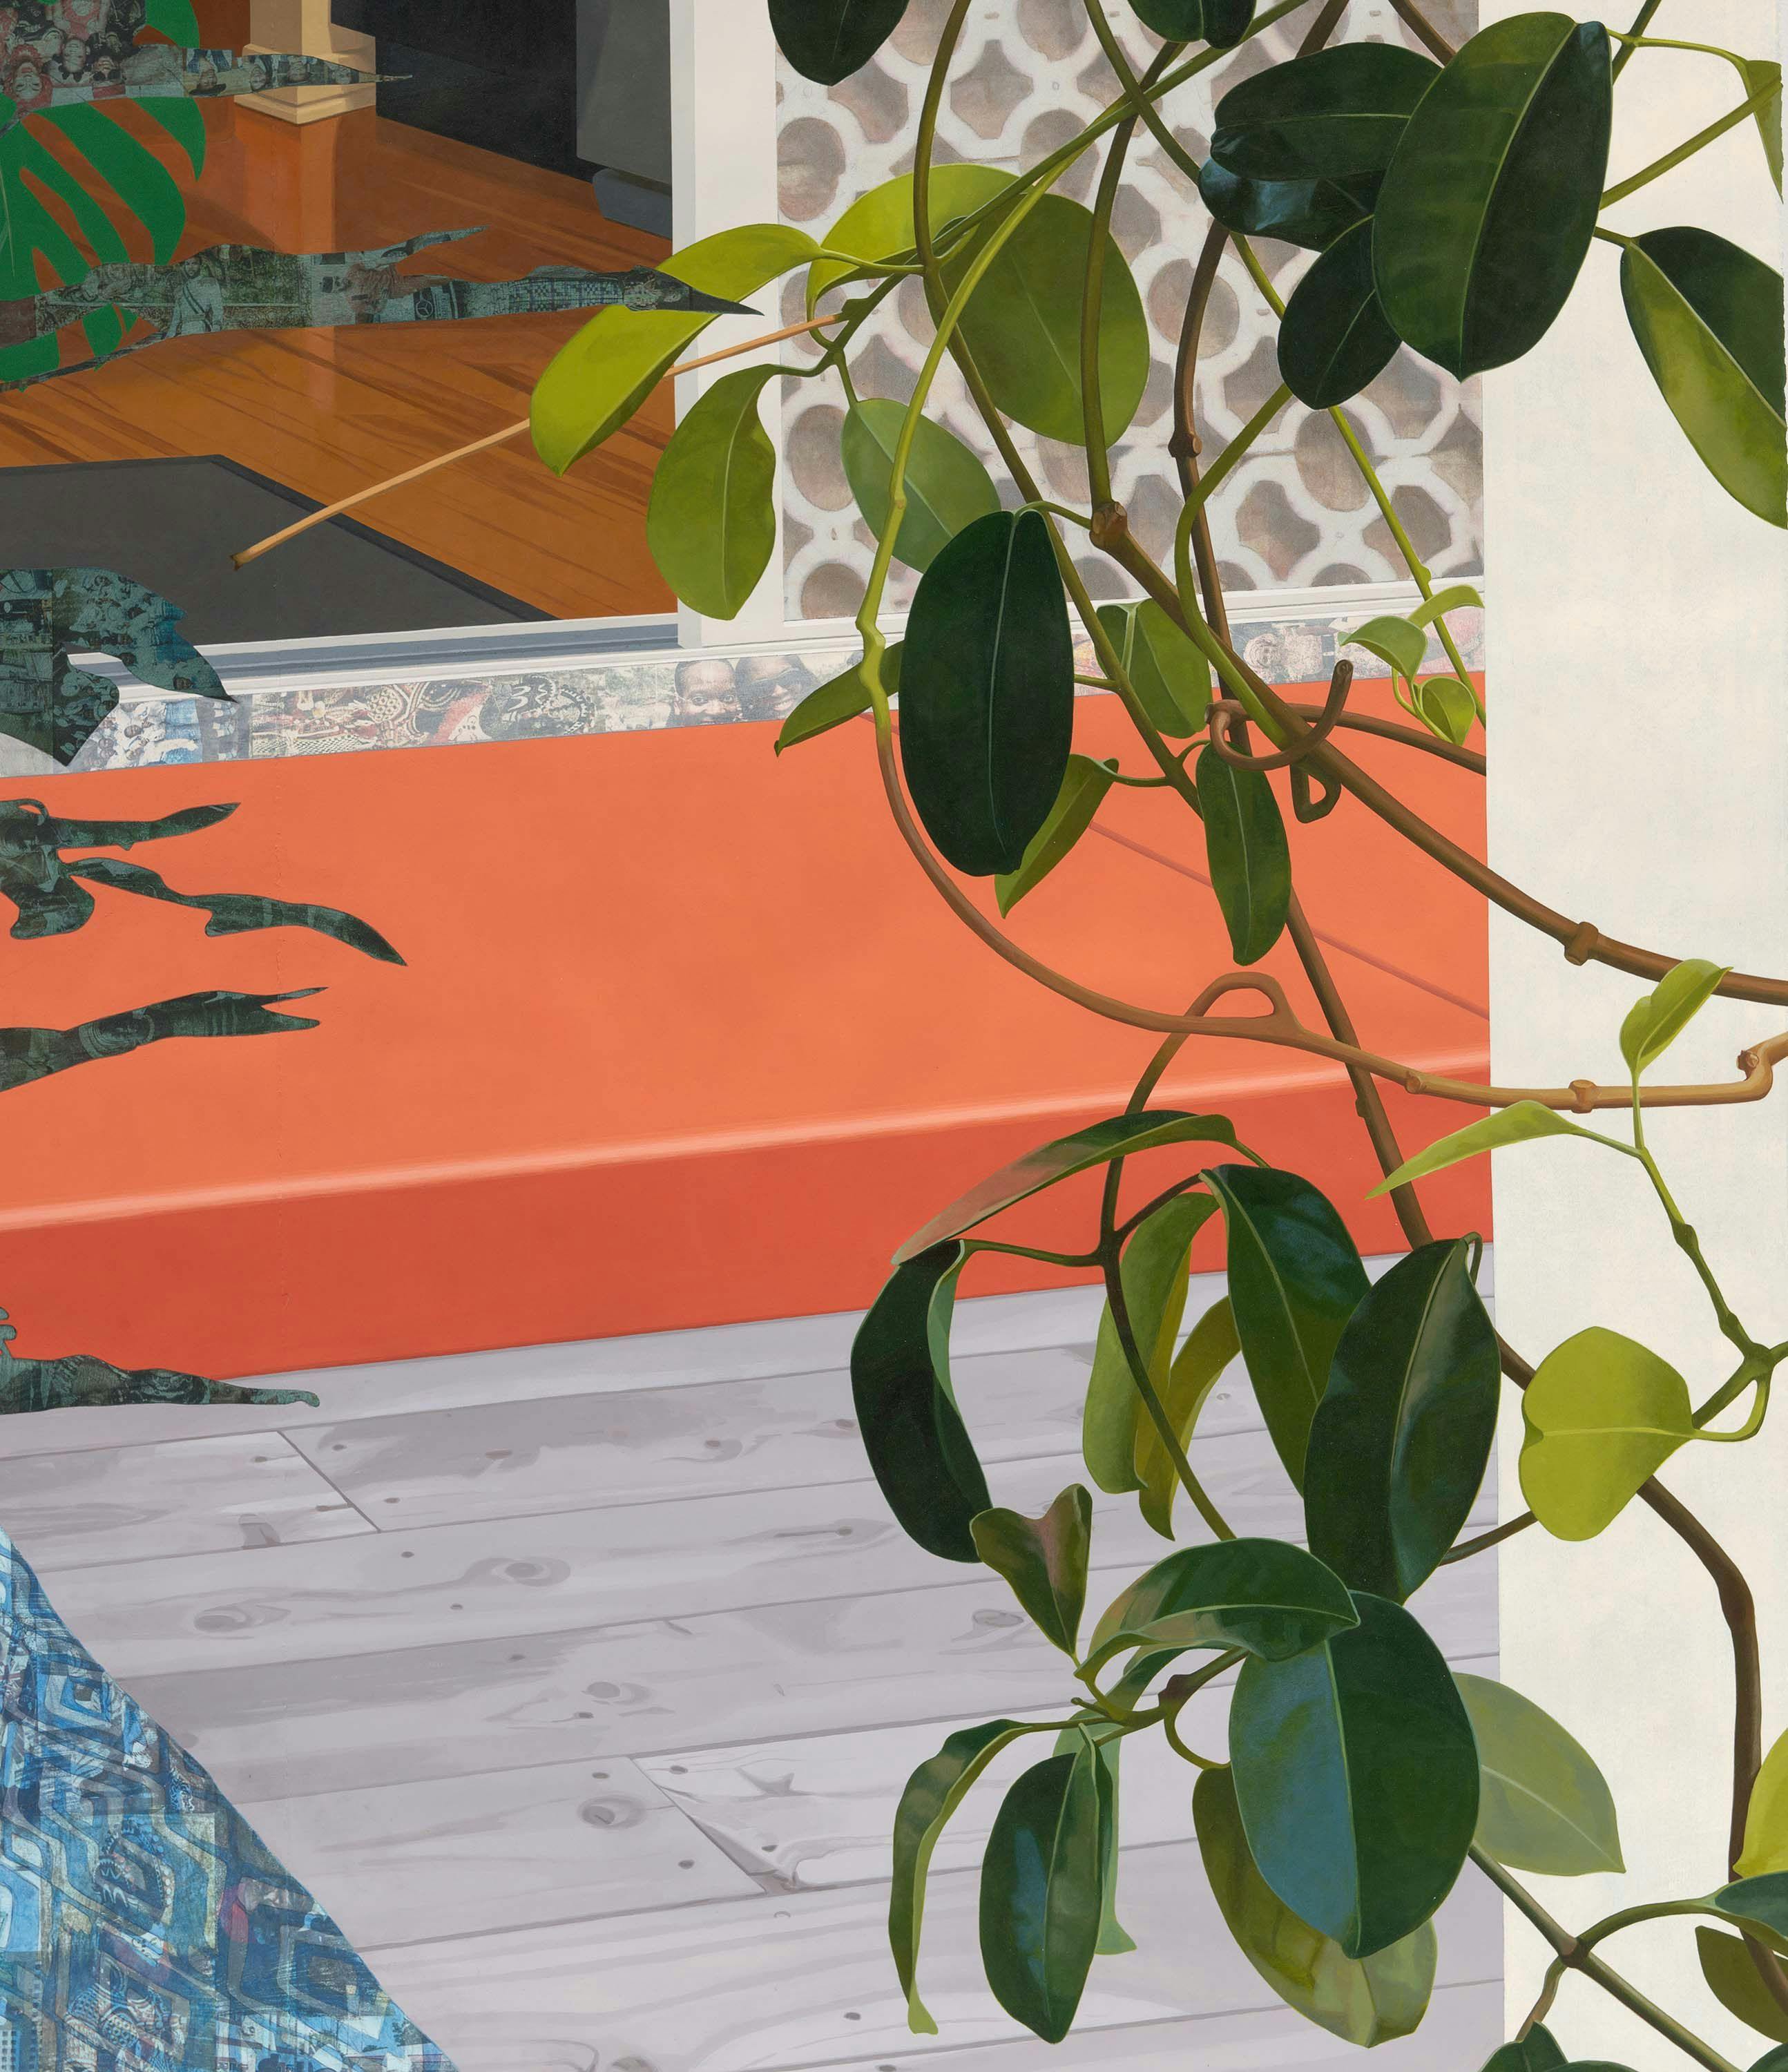 A detail from a work on paper by Njideka Akunyili Crosby, titled Still You Bloom in This Land of No Gardens, dated 2021.